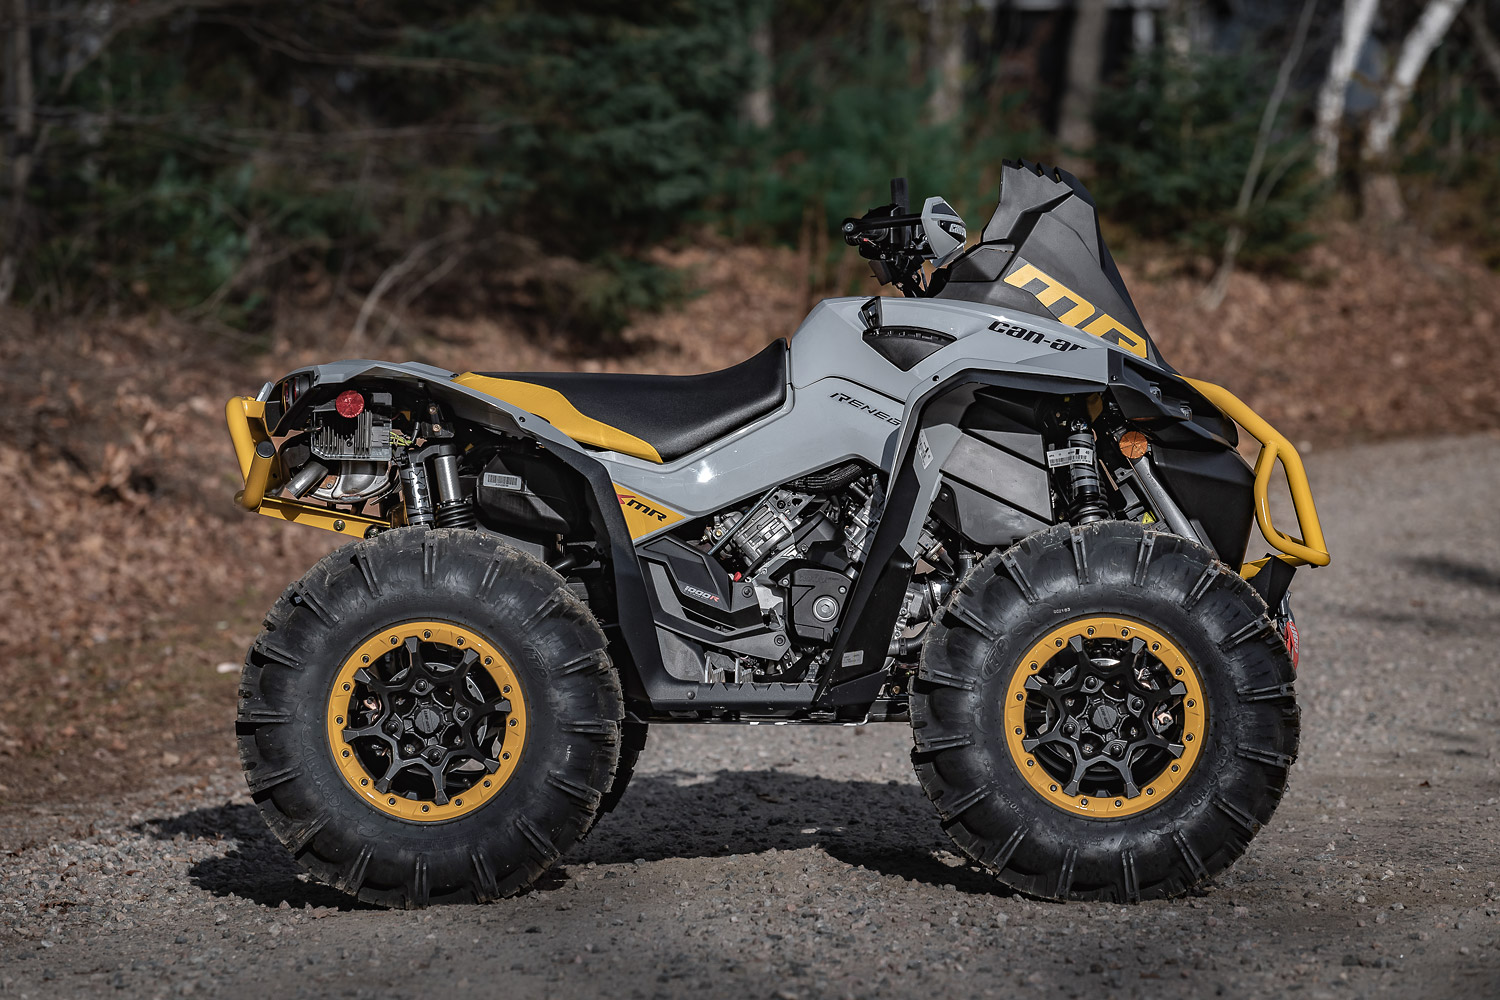 2023 Can-Am Renegade X mr 1000R Detailed Overview - Dirt Trax Online